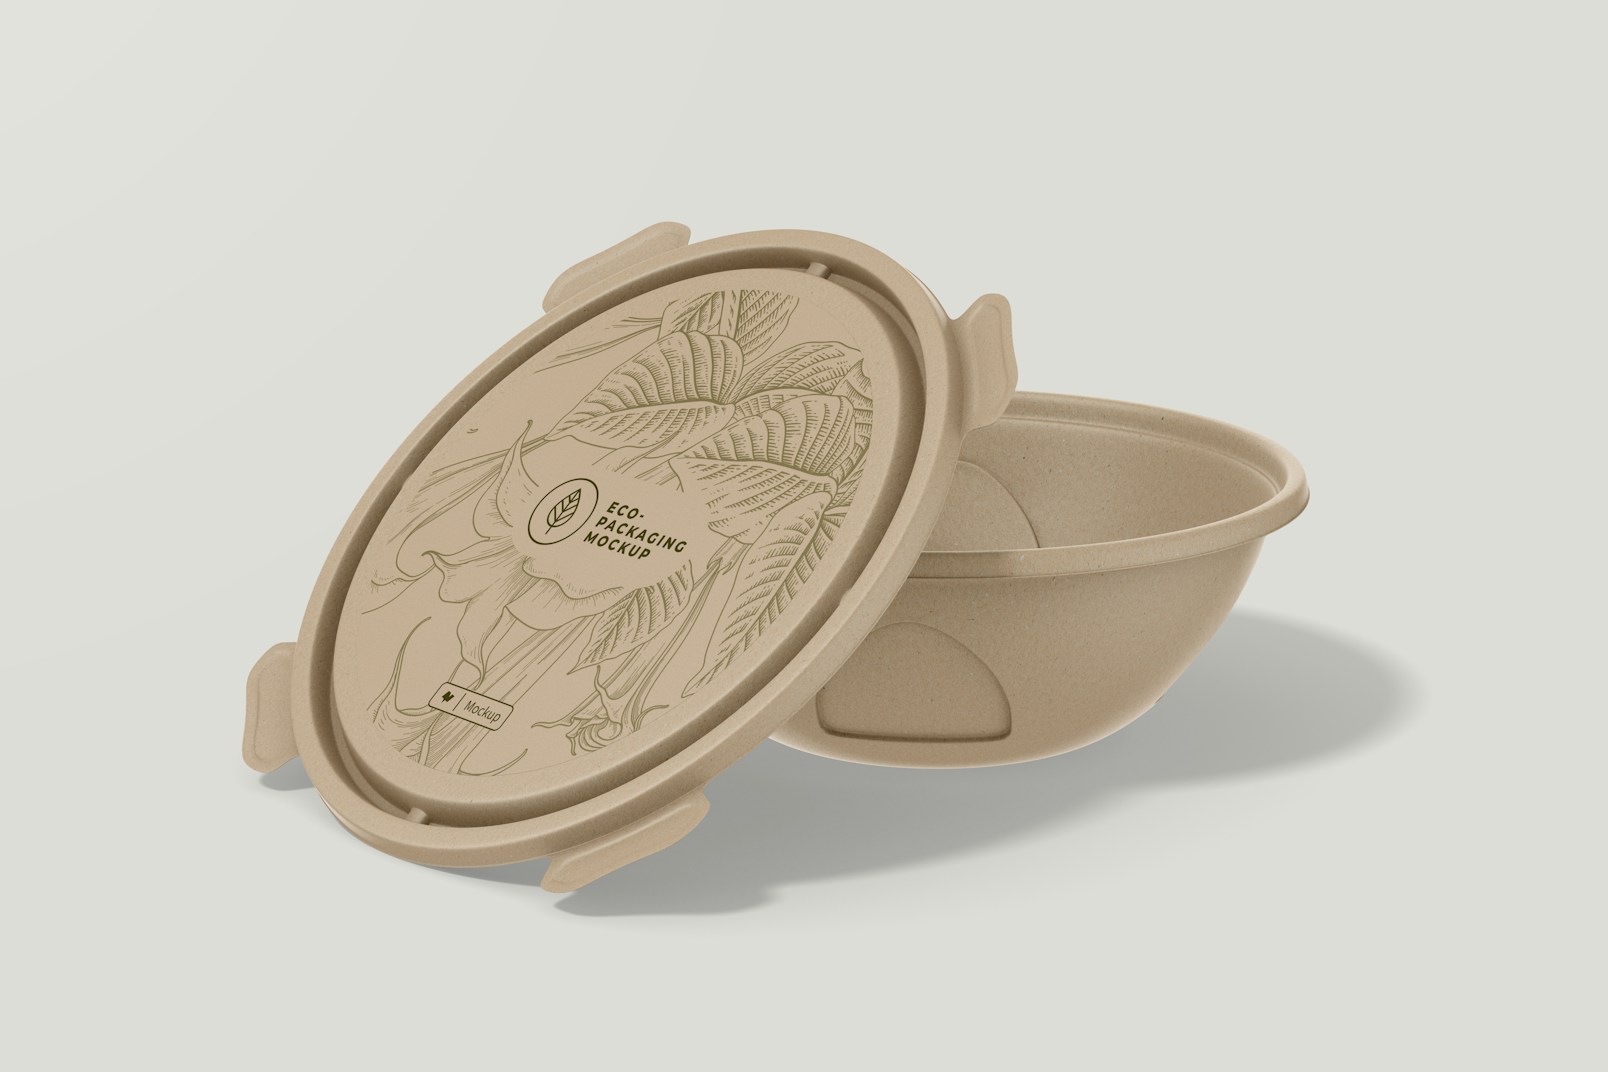 Compostable Bowl with Lid Mockup, Opened